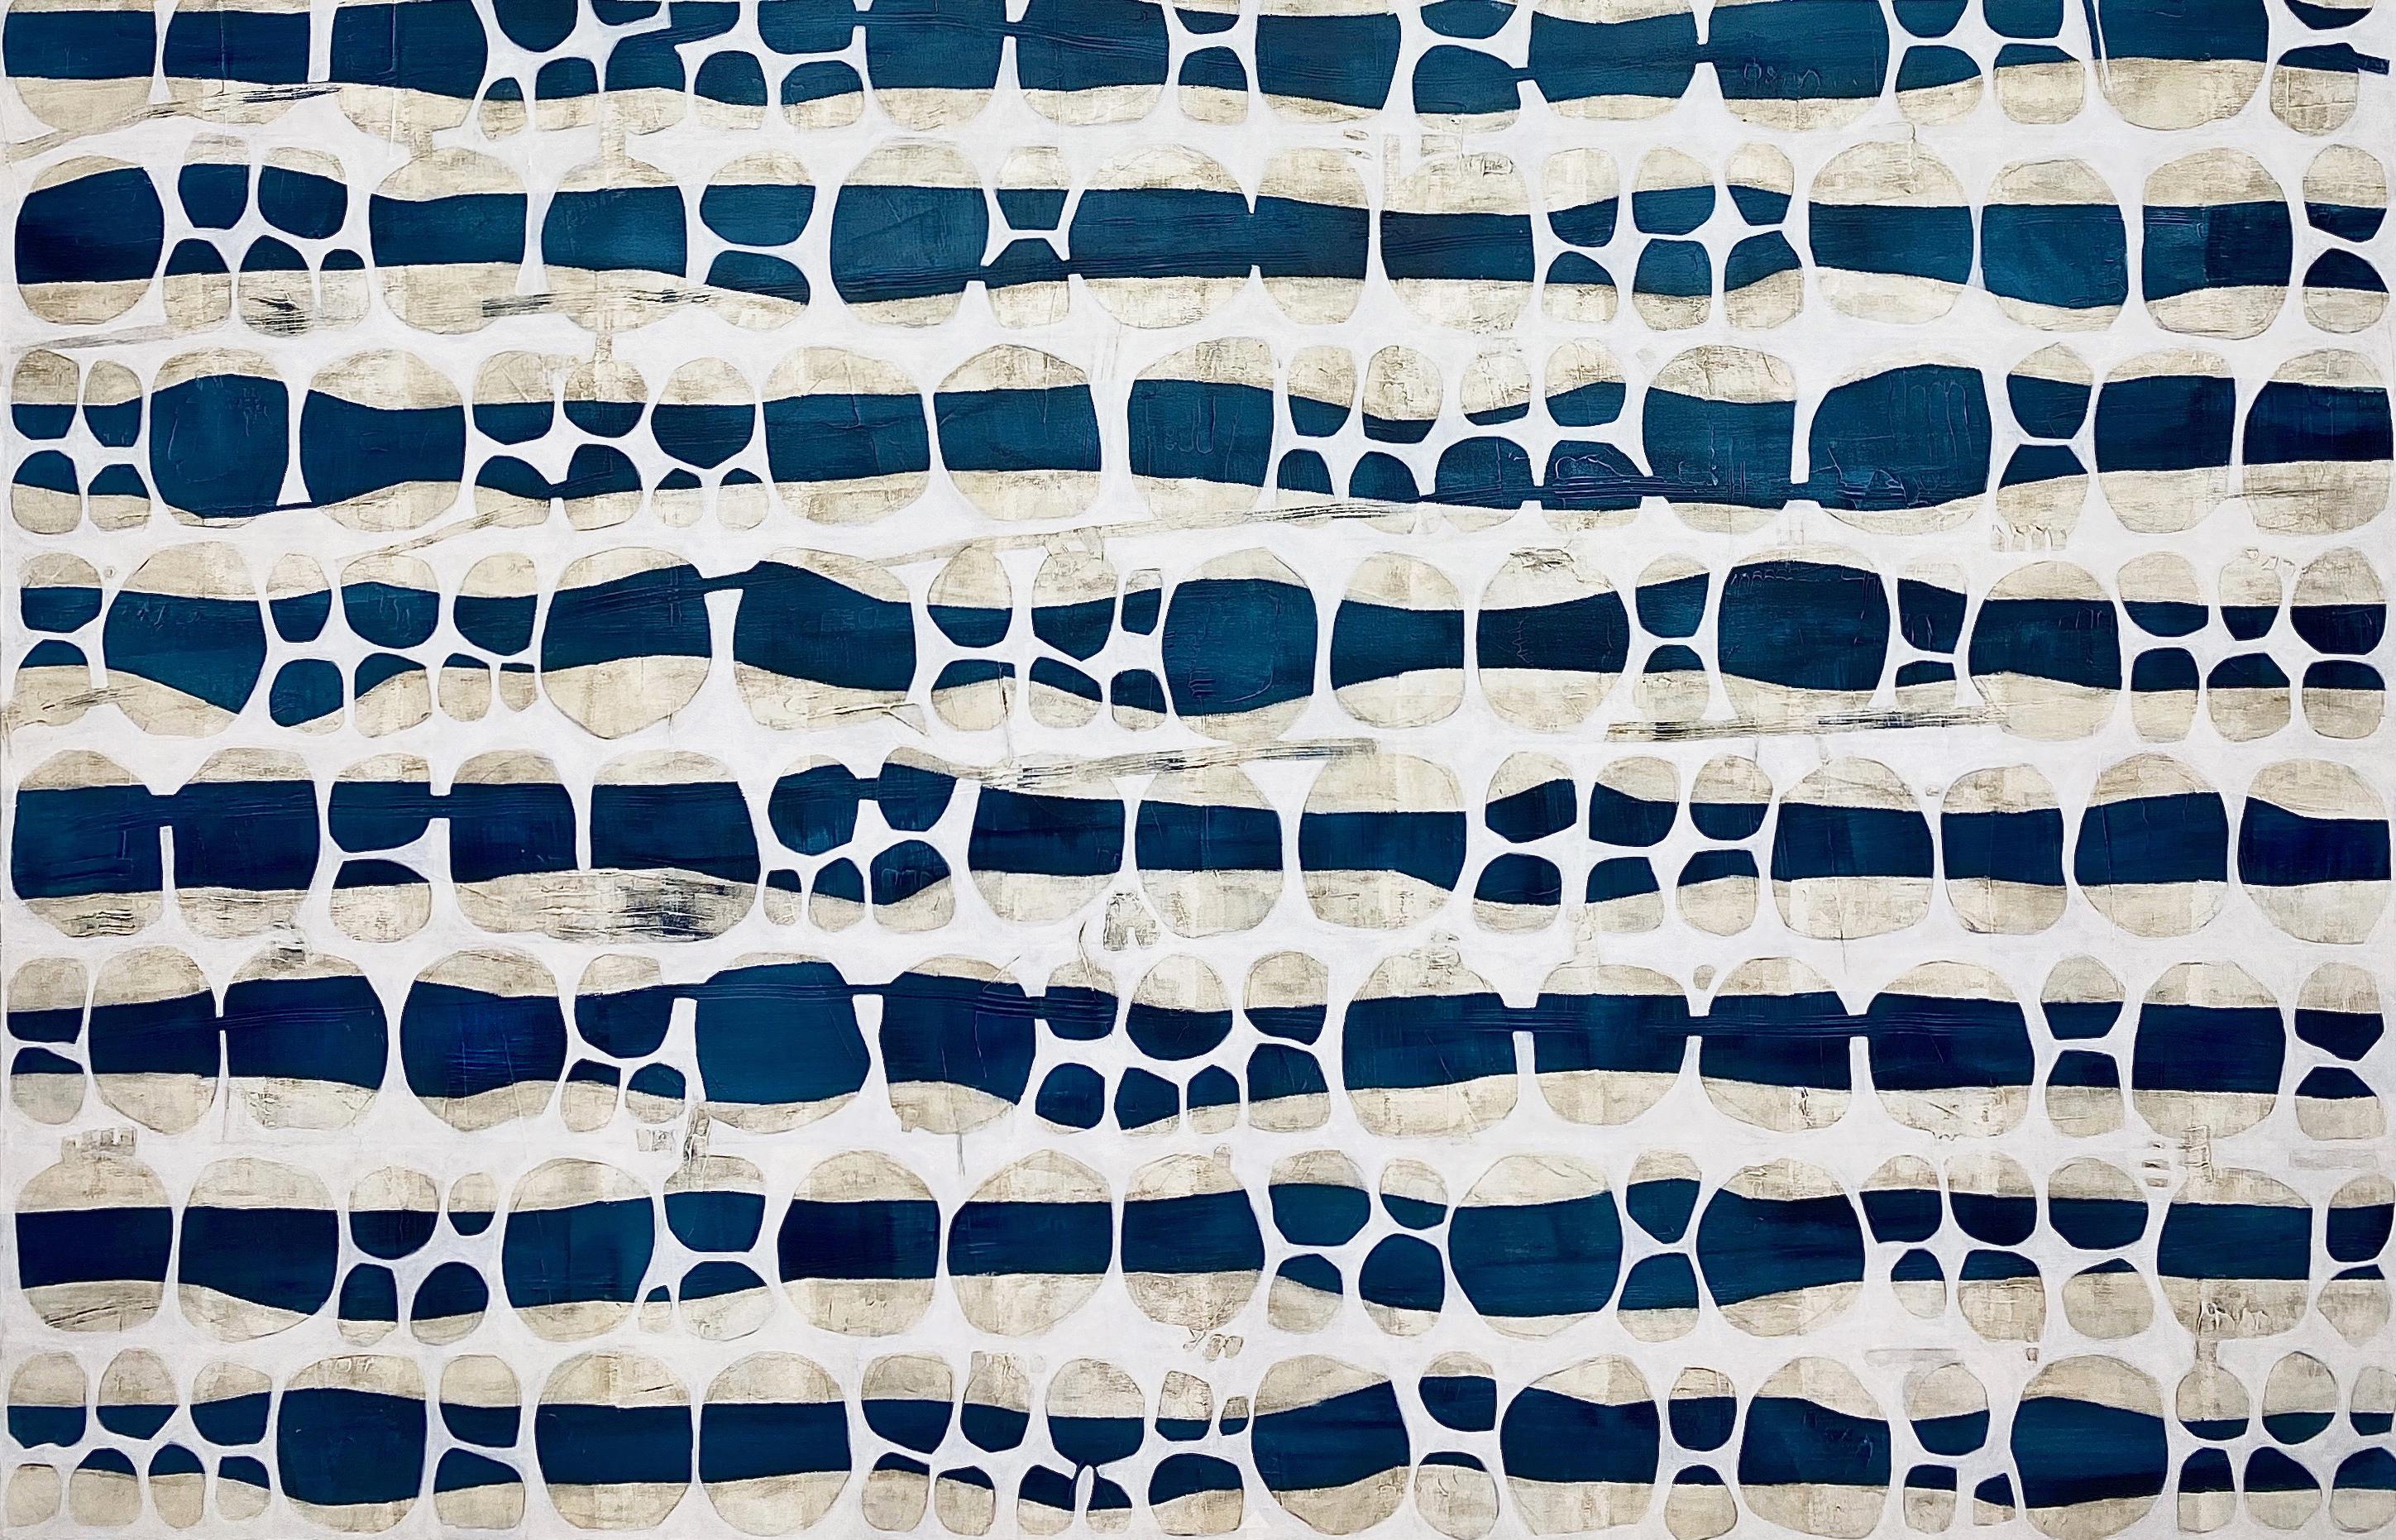 This large-scale abstract statement painting by artist Sofie Swann features curving stripes of deep blue and textured beige that stretch from one side of the composition to the other. A white circular patter that almost resembles abstracted netting